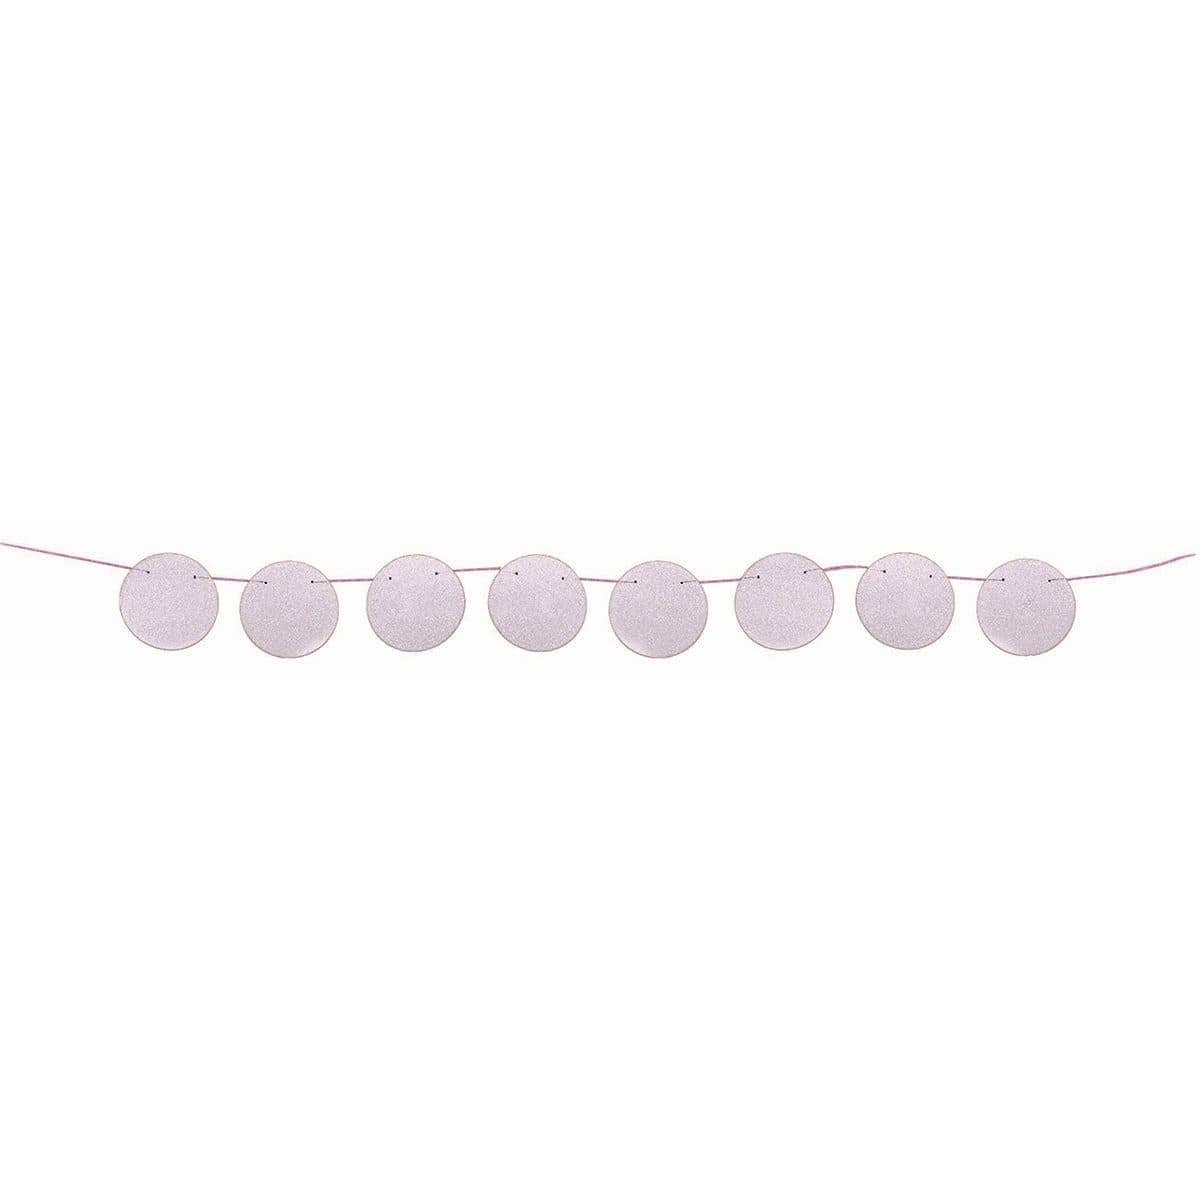 Buy Decorations Diamond Circles Banner 8ft. - Light Pink sold at Party Expert